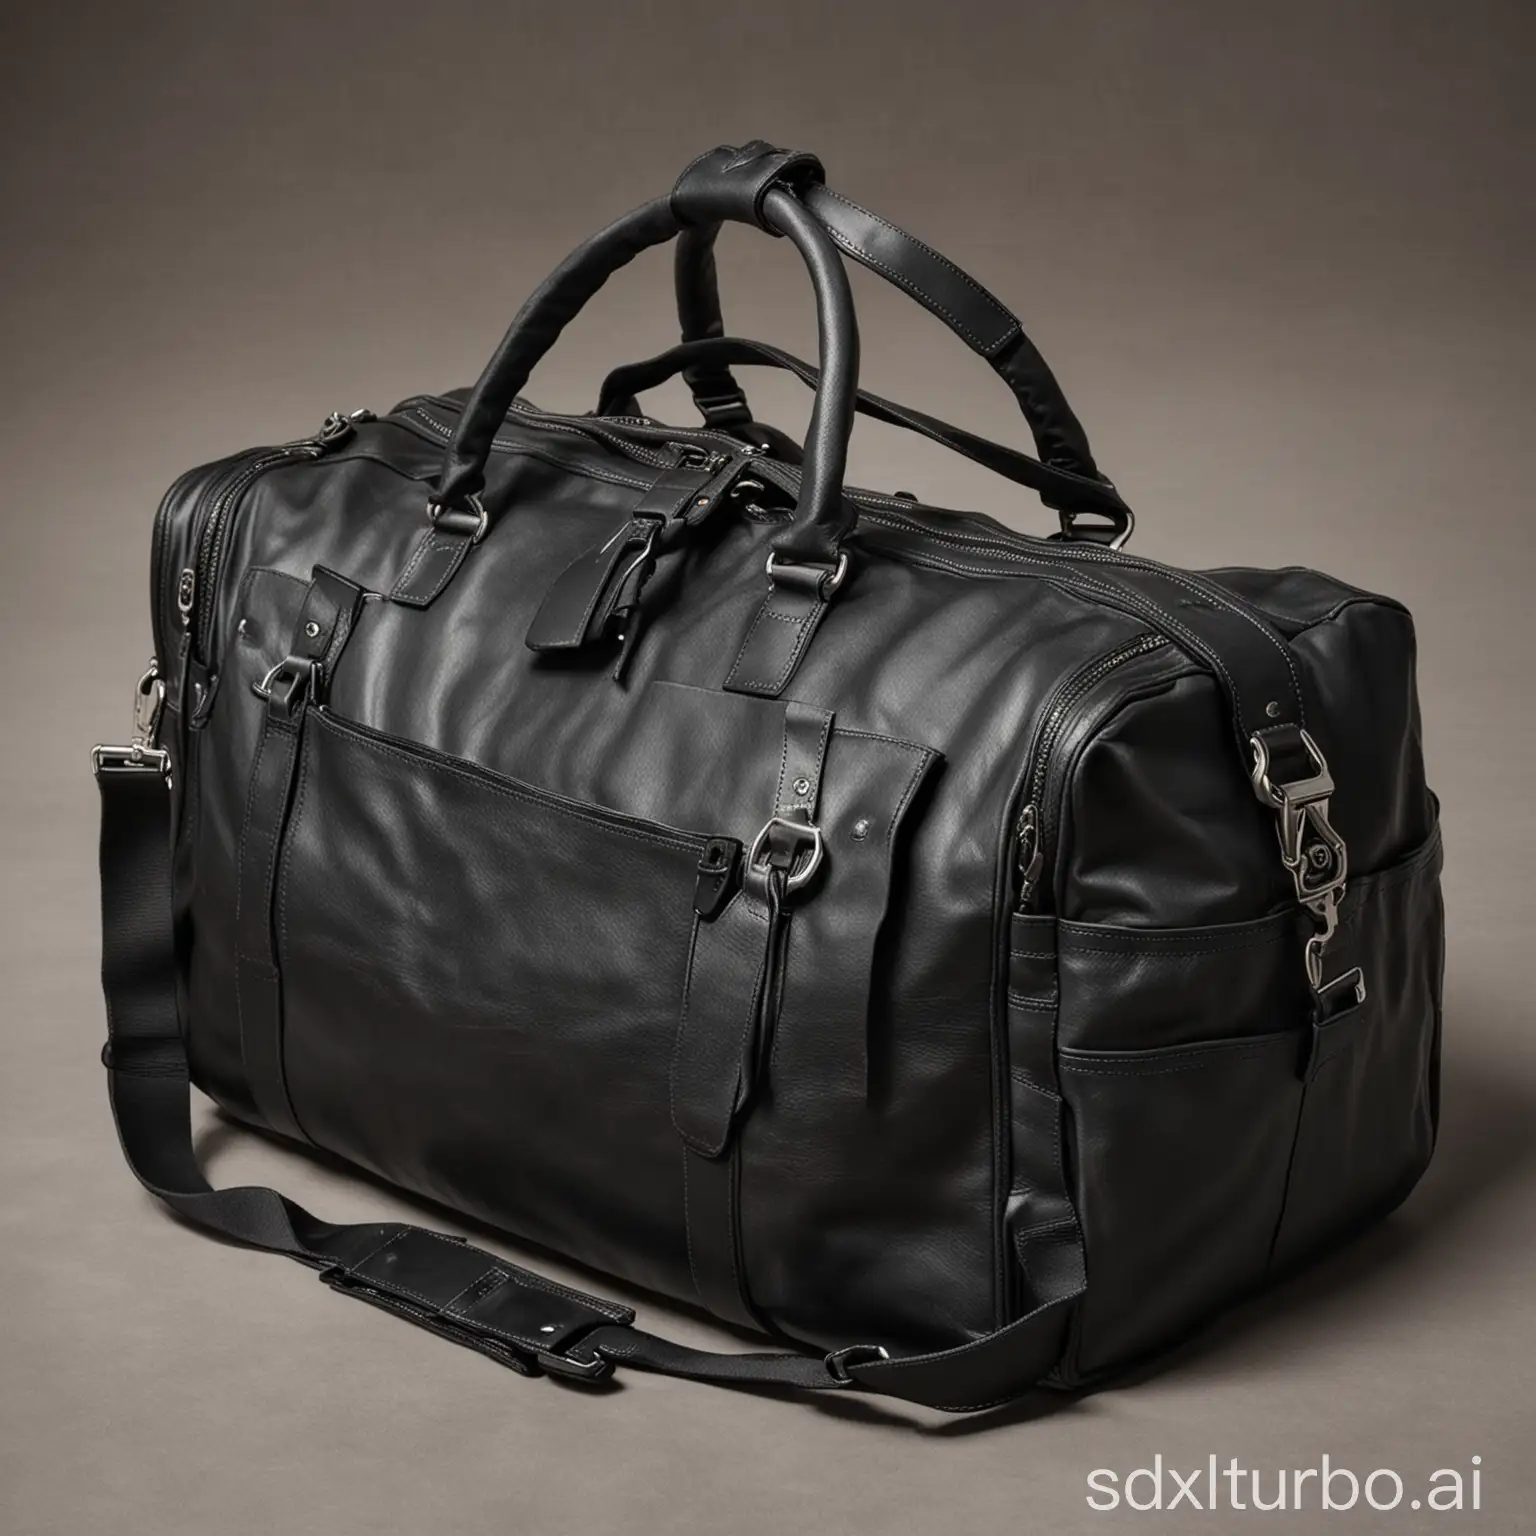 A close-up of a black, leather duffle bag. The bag is made of a durable material and has a sturdy construction. It has two large handles and a detachable shoulder strap. The bag is open and filled with travel essentials, such as clothes, toiletries, and a laptop.